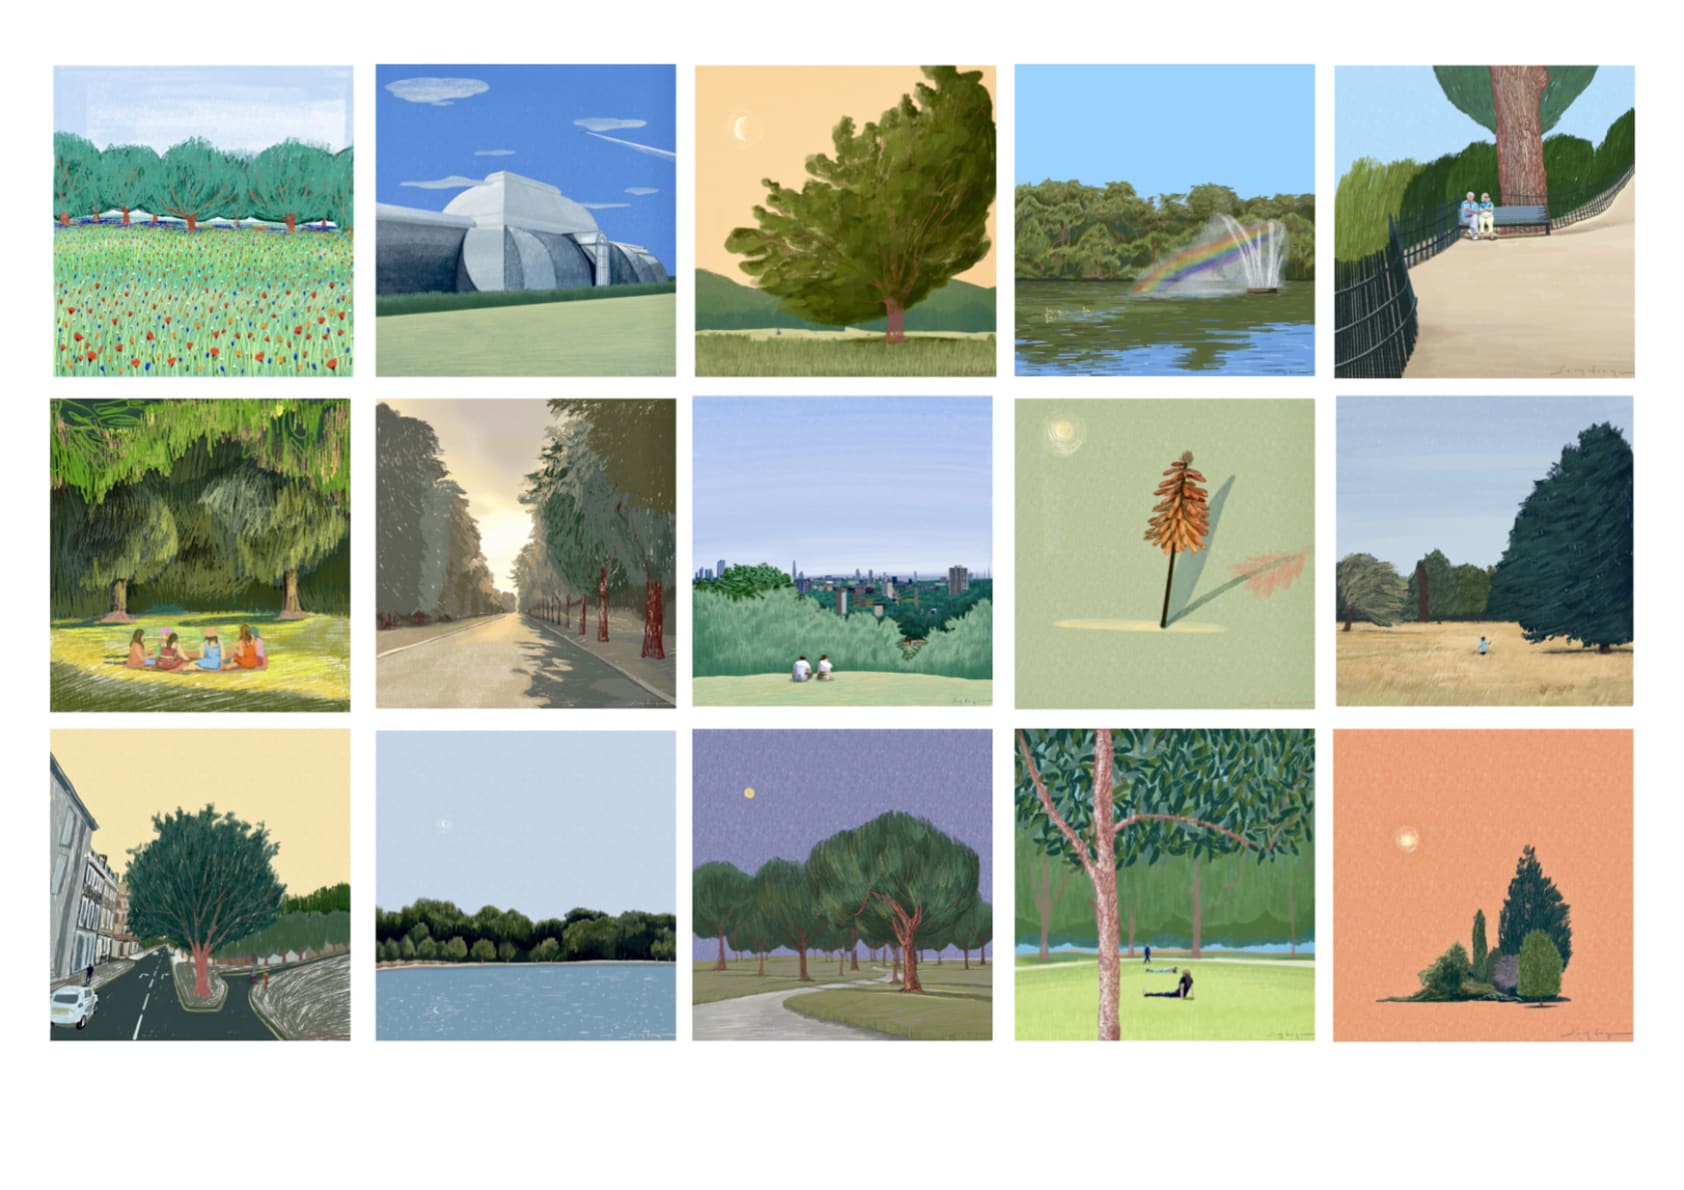 Project: Captured Scenes: Episode1 - 15, documents and illustrates Ine's perspectives on the beauty of nature.